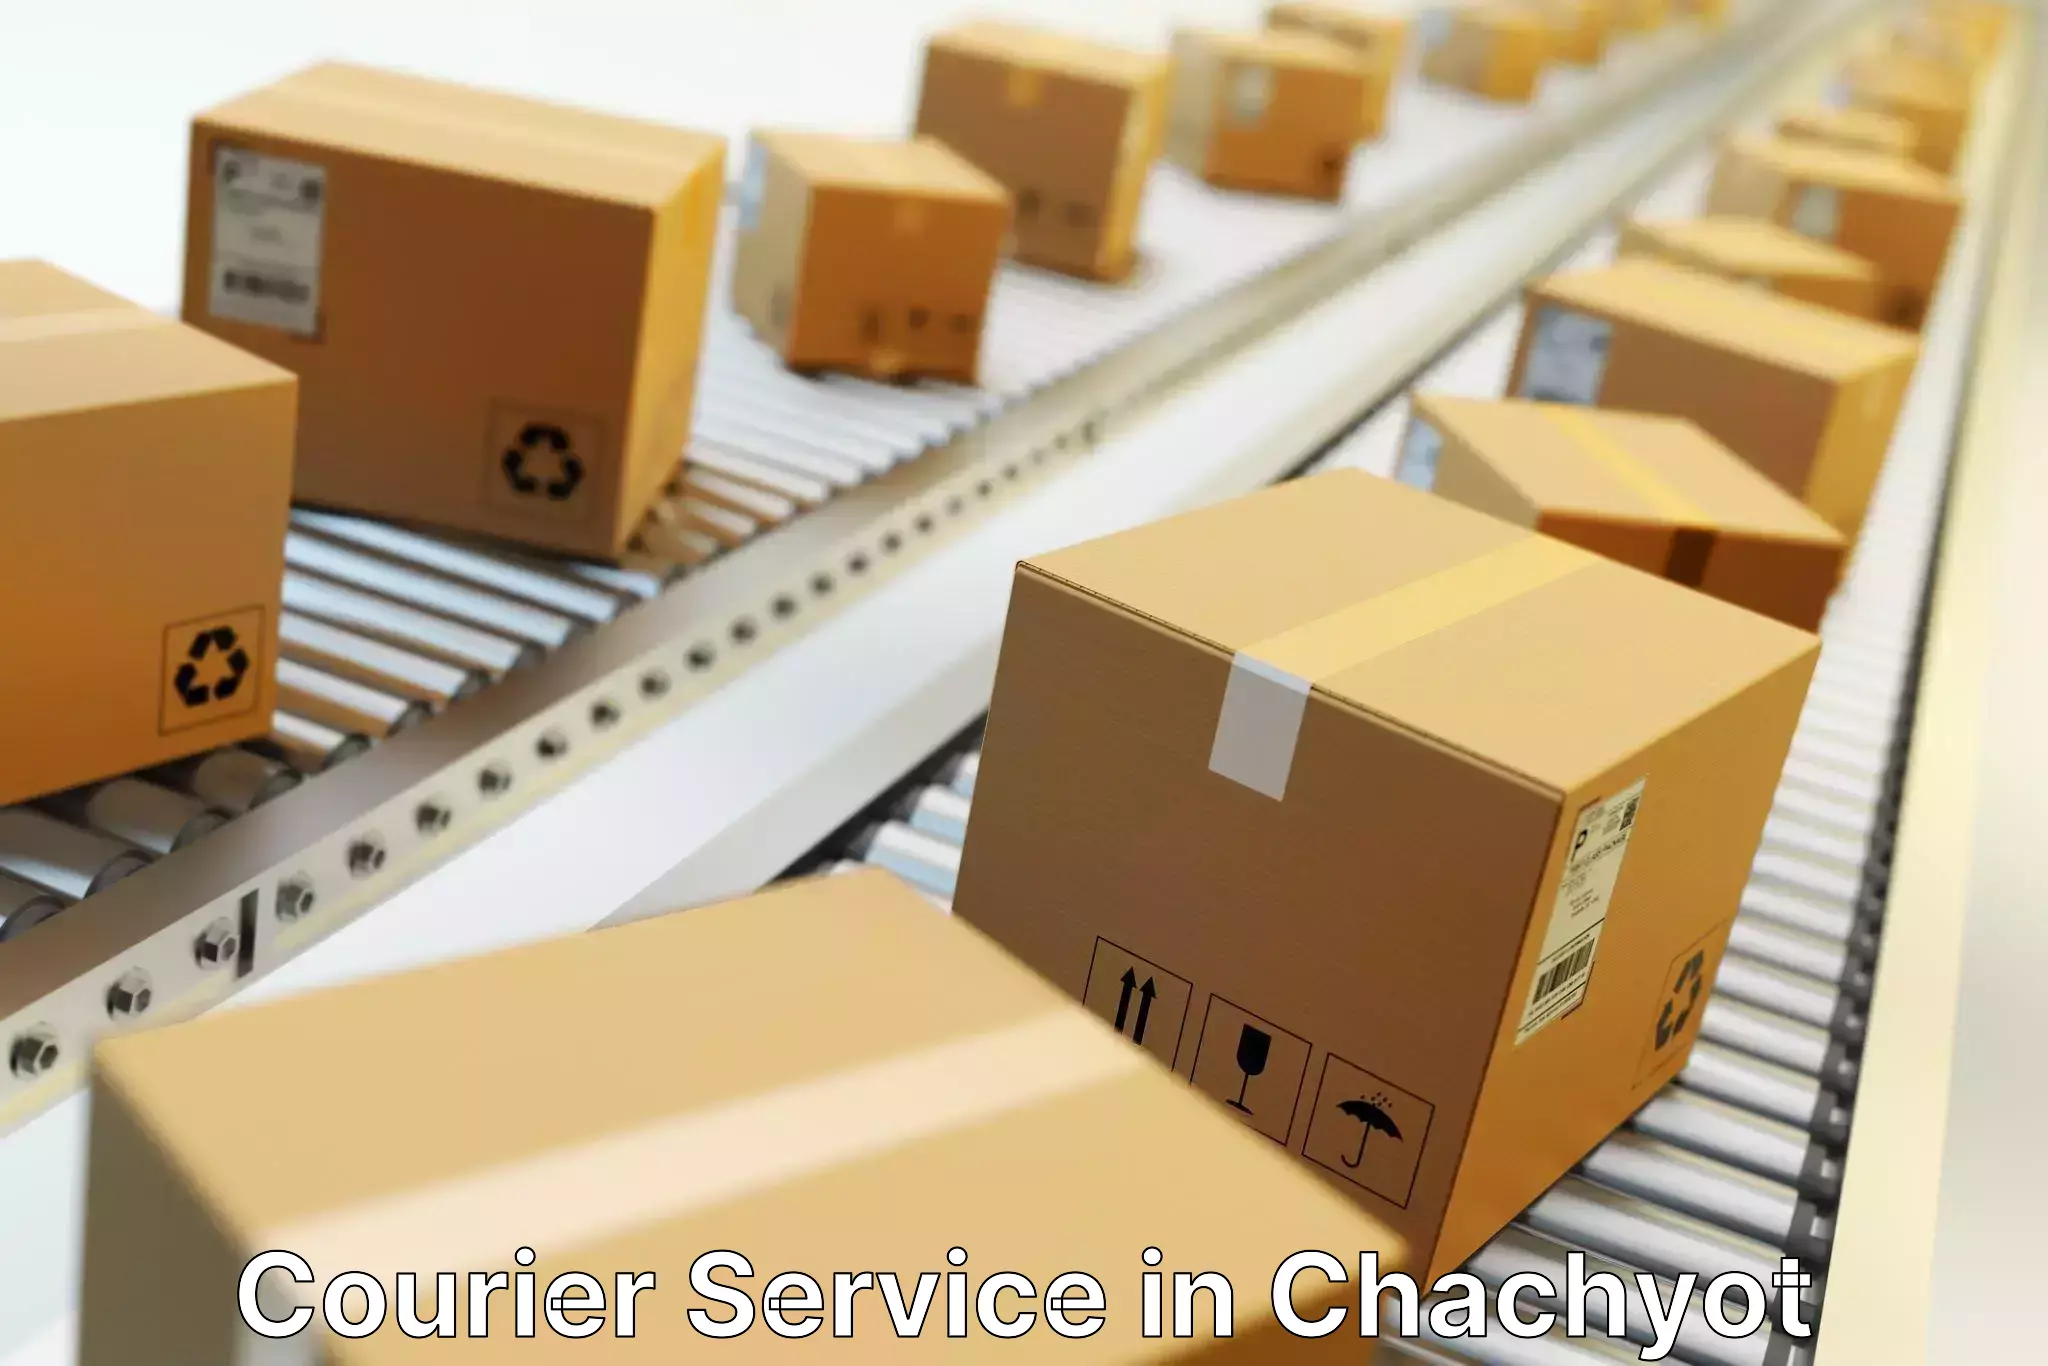 Professional parcel services in Chachyot